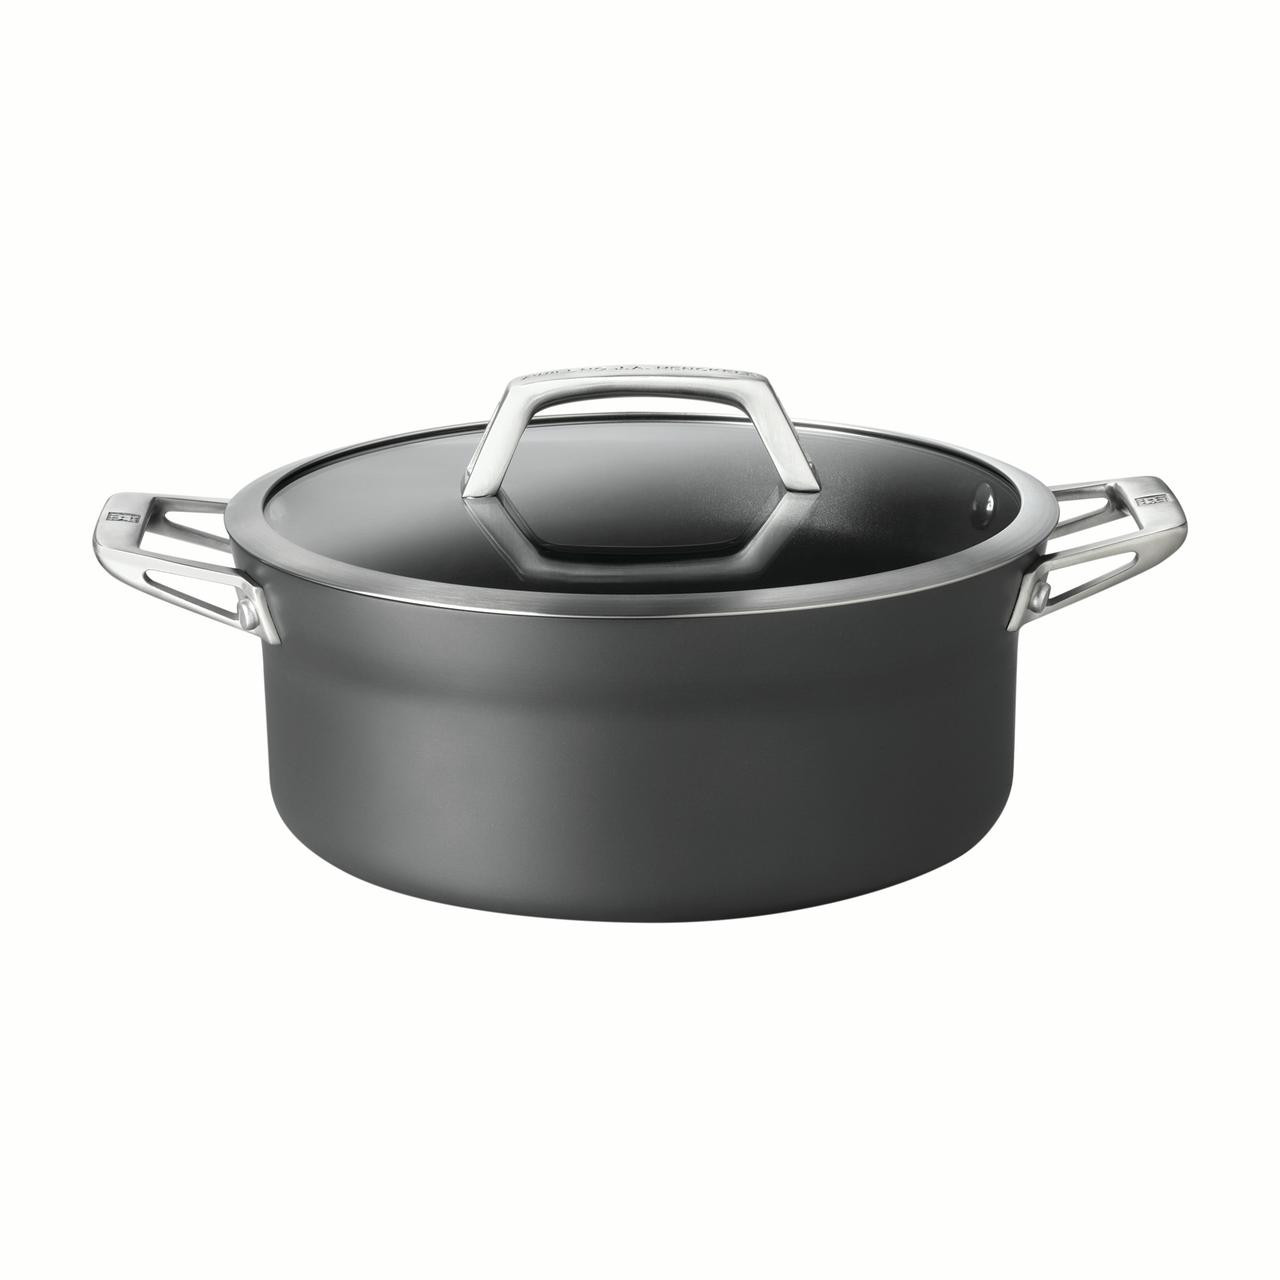 https://cdn11.bigcommerce.com/s-hccytny0od/images/stencil/1280x1280/products/2745/9784/zwilling-motion-nonstick-dutch-oven__27939.1566033506.jpg?c=2?imbypass=on